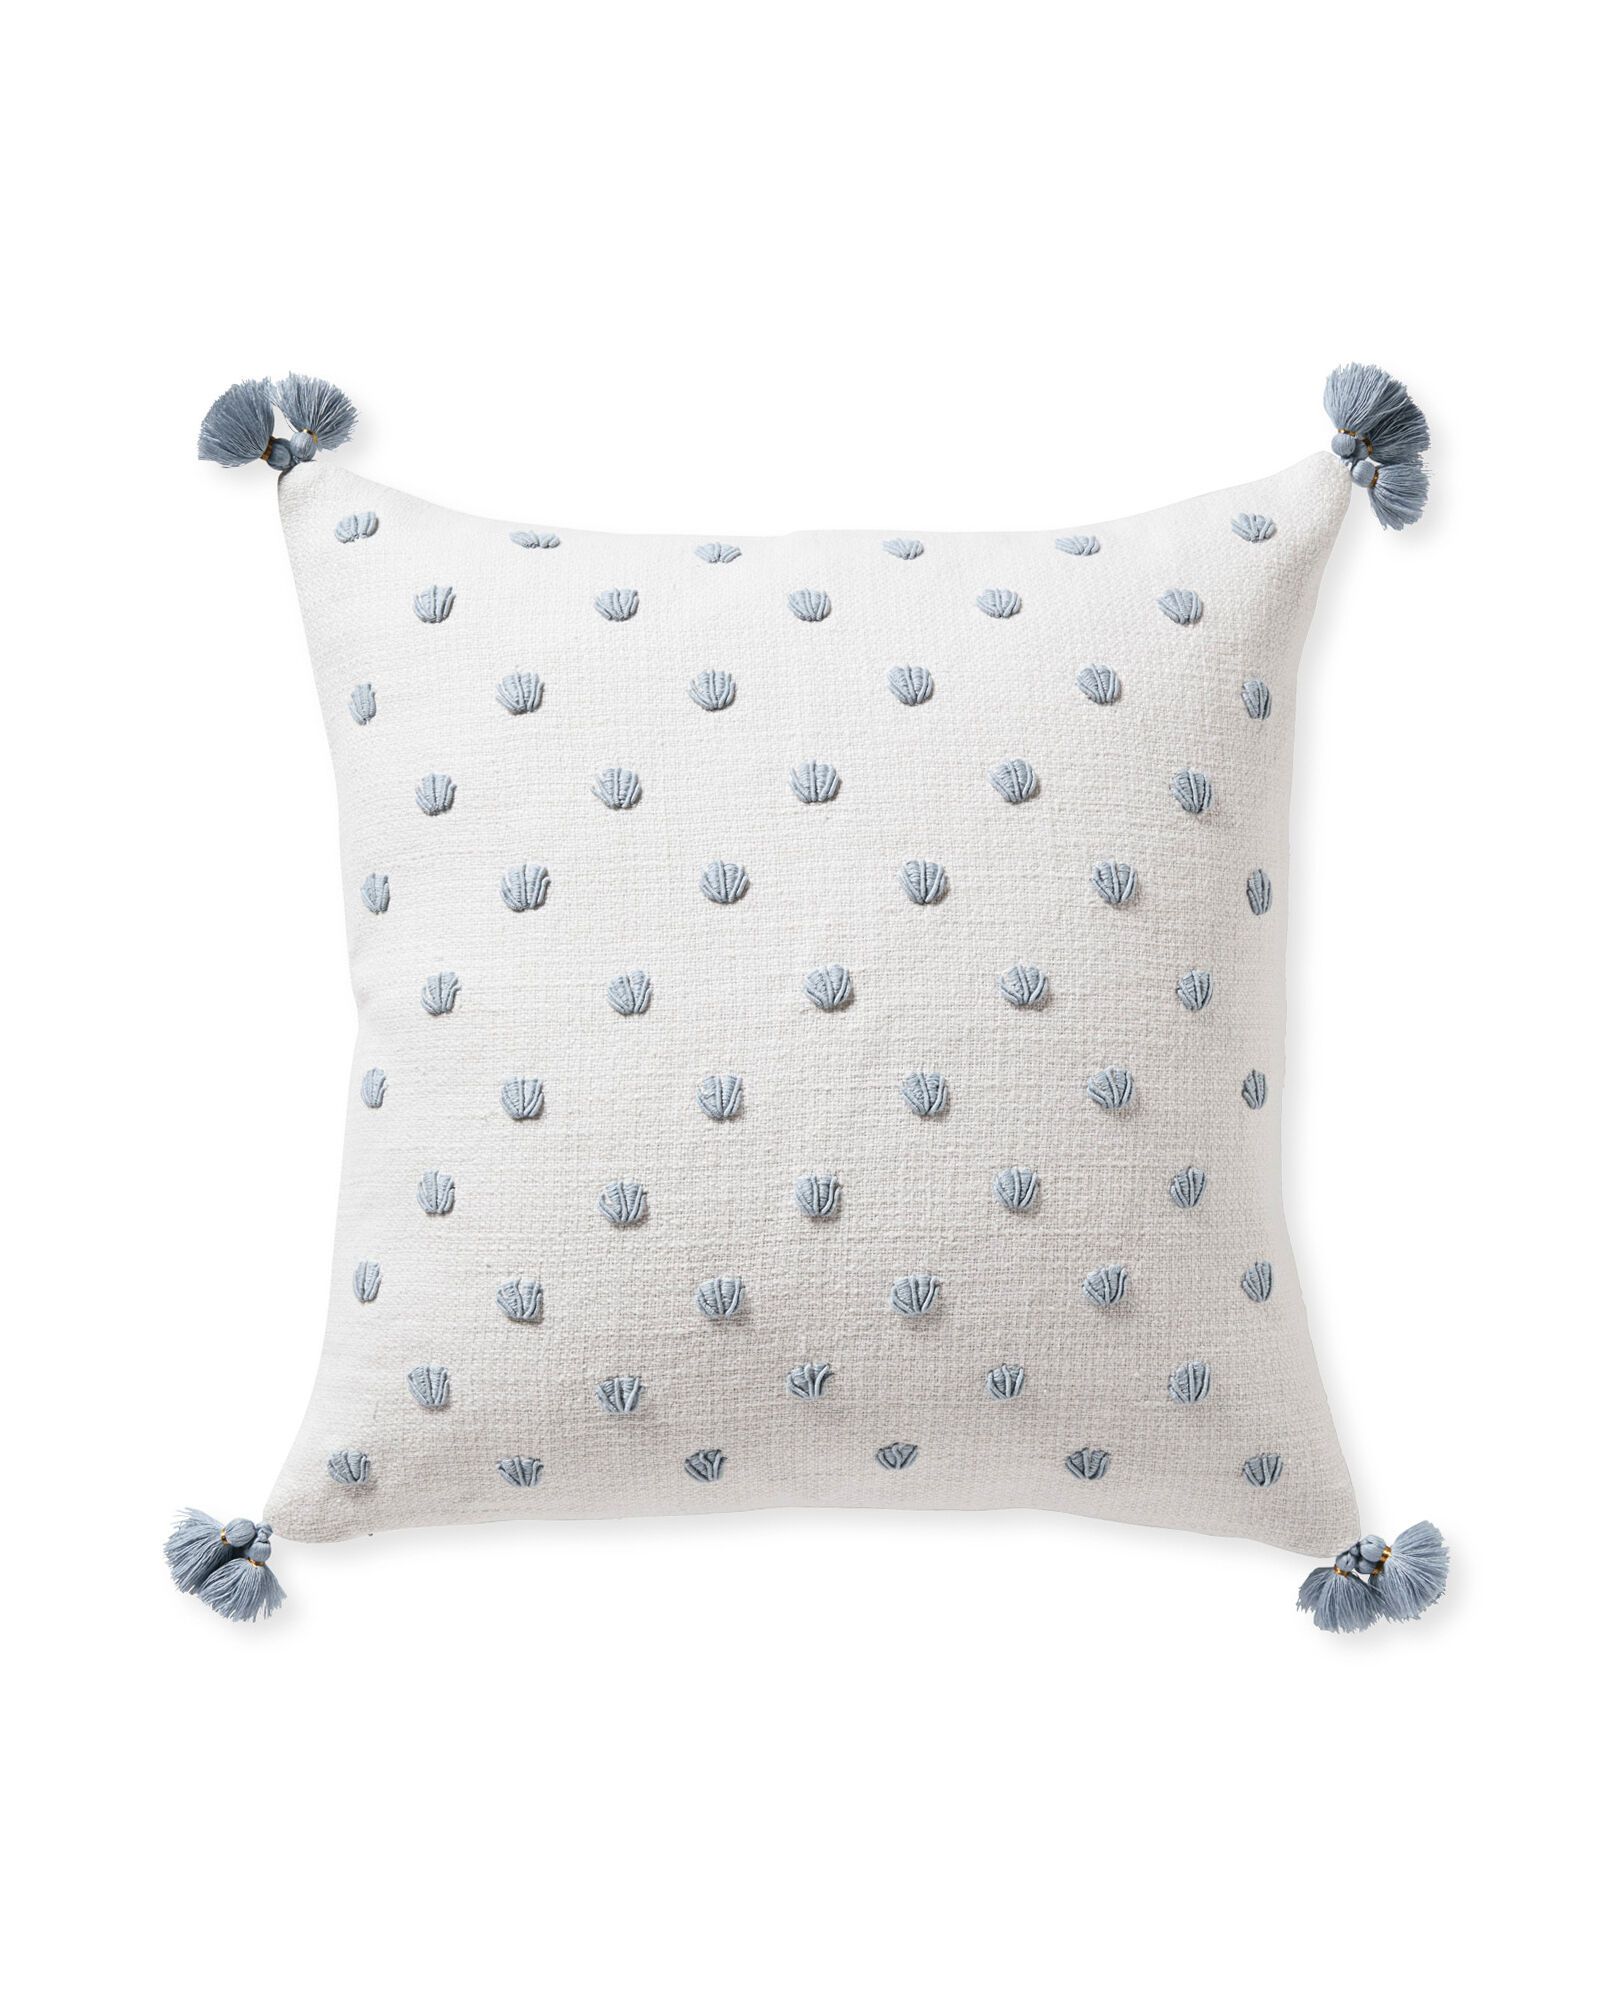 East Beach Pillow Cover | Serena and Lily